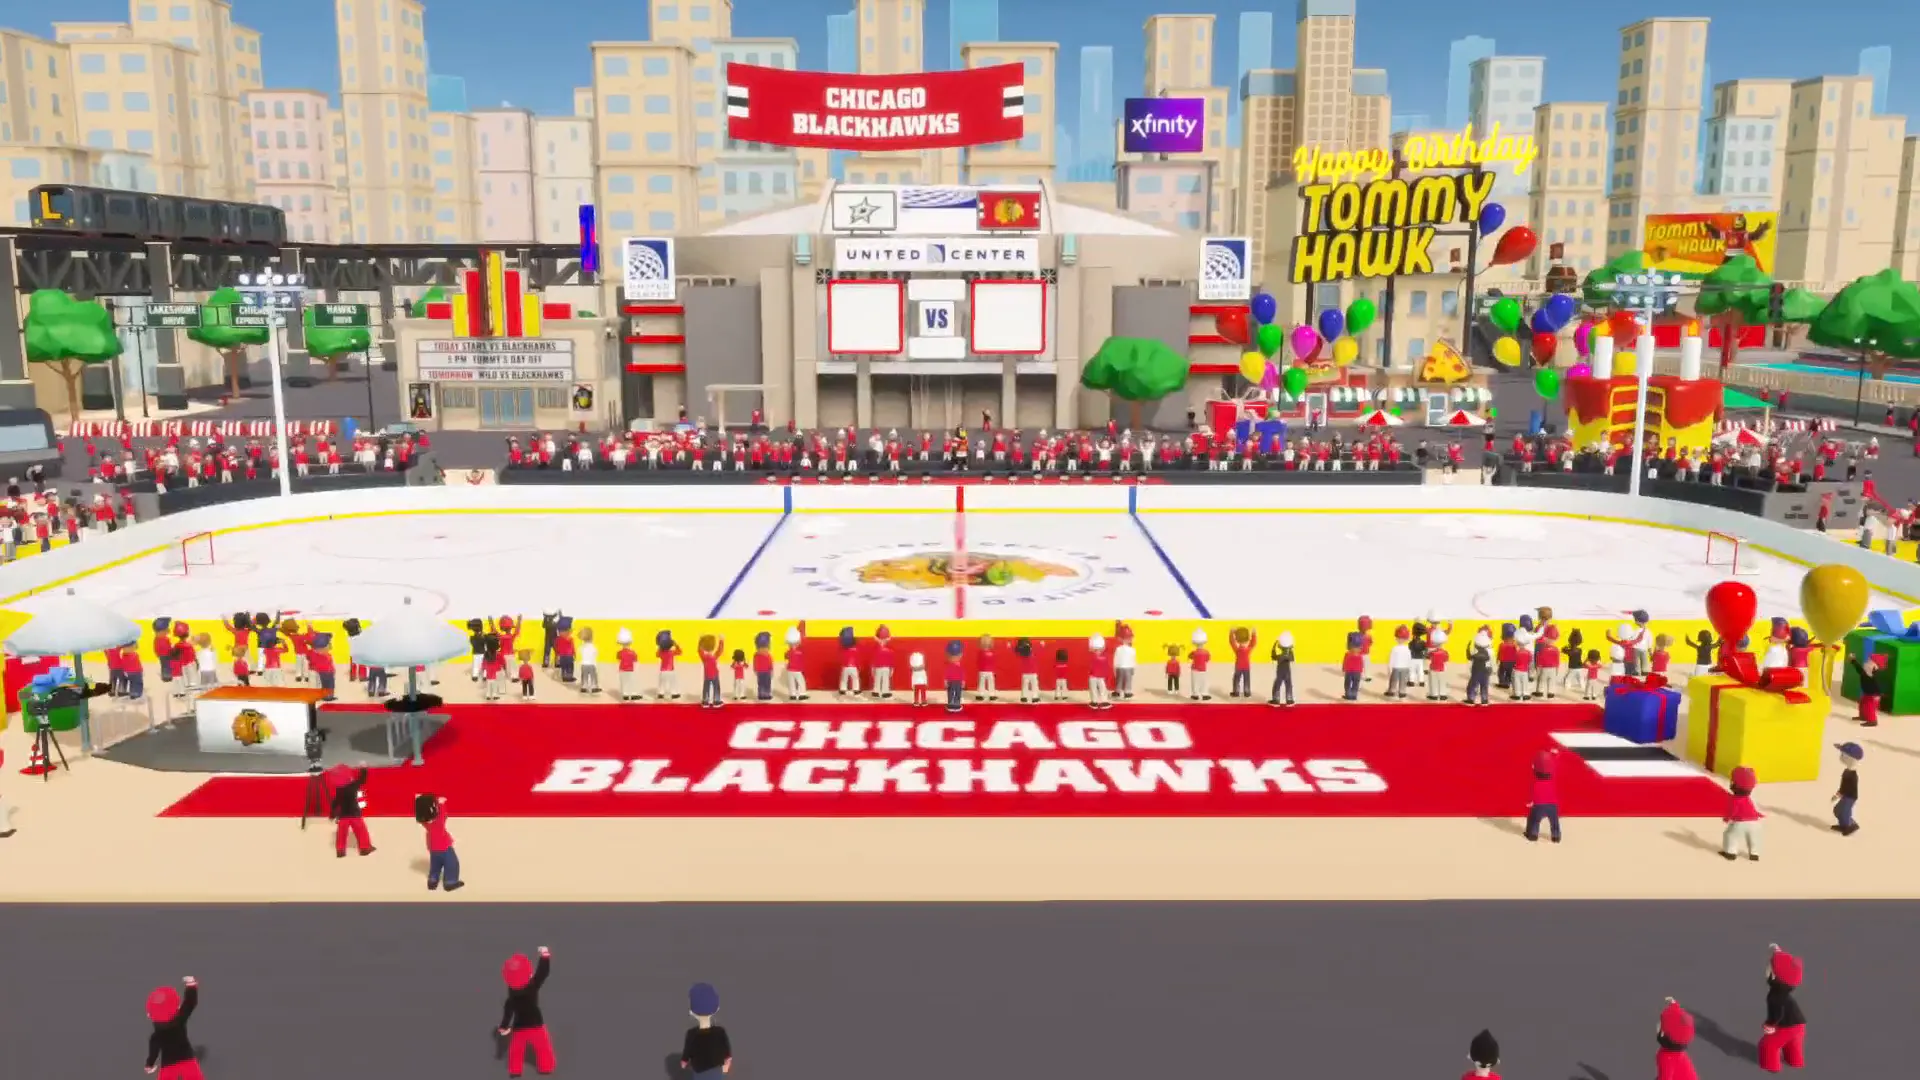 NBC Sports Chicago to televise real-time animated NHL game between Blackhawks and Stars